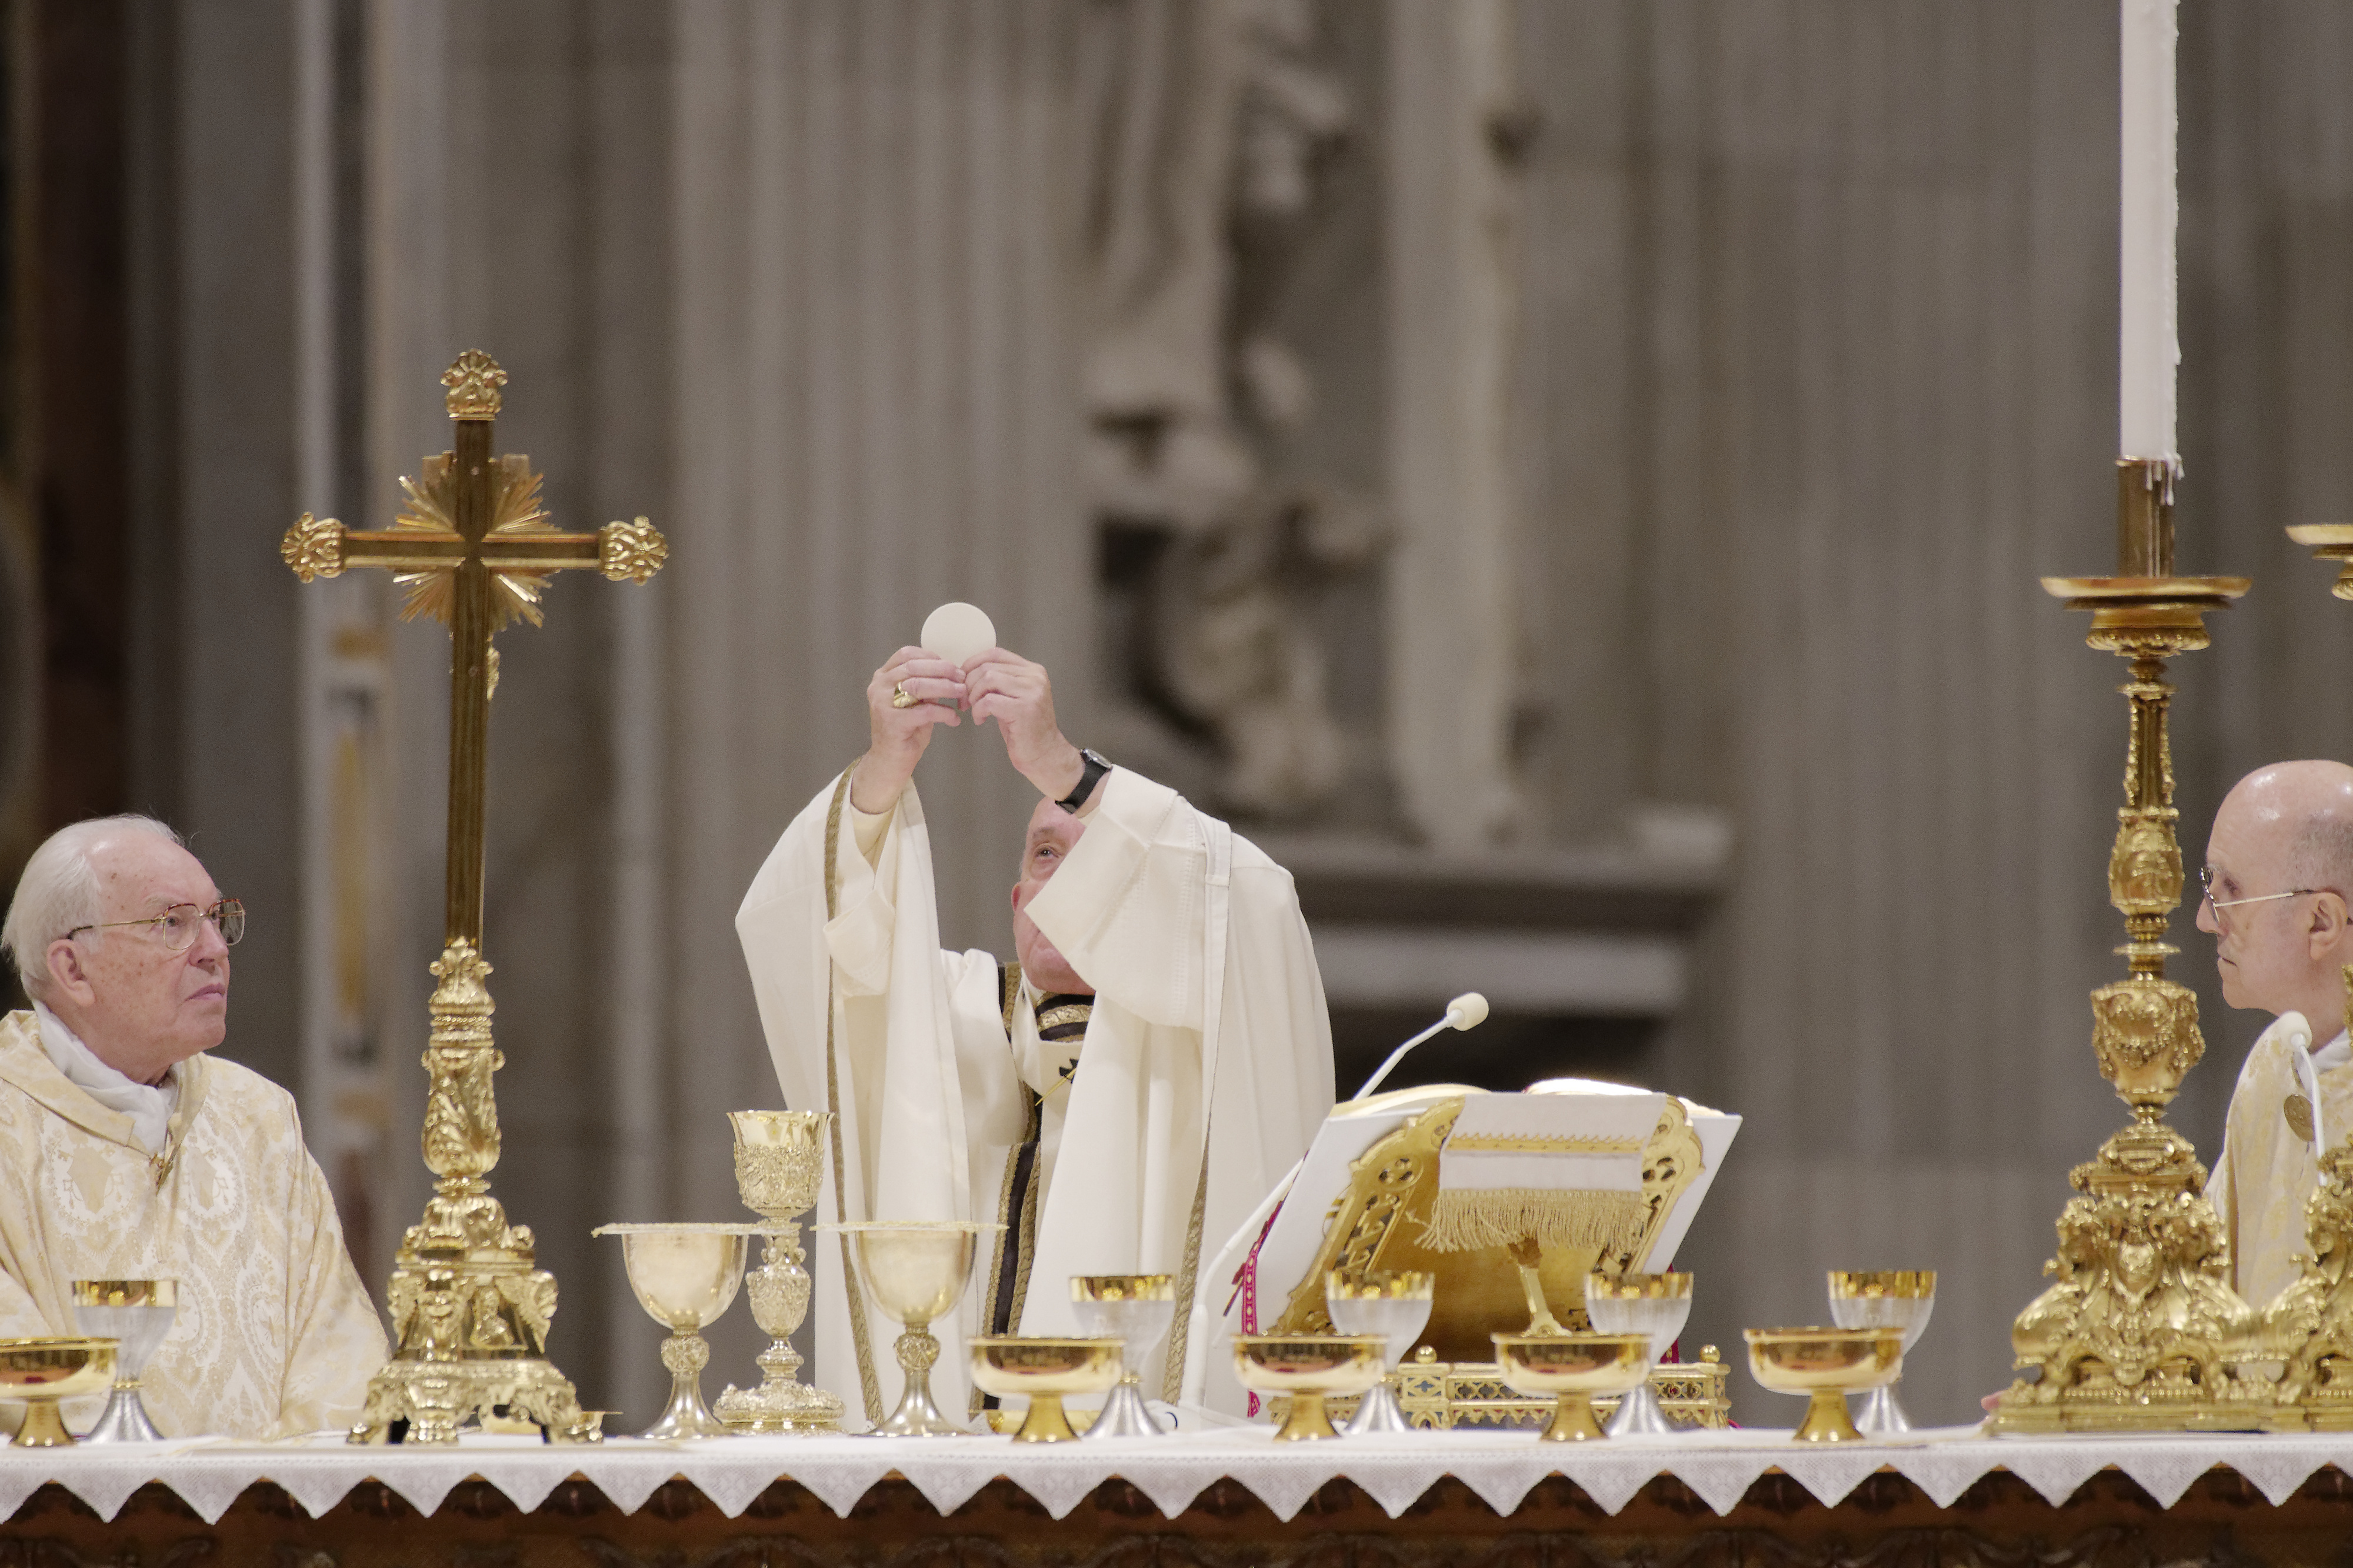 Pope Francis: May Christ be the light!